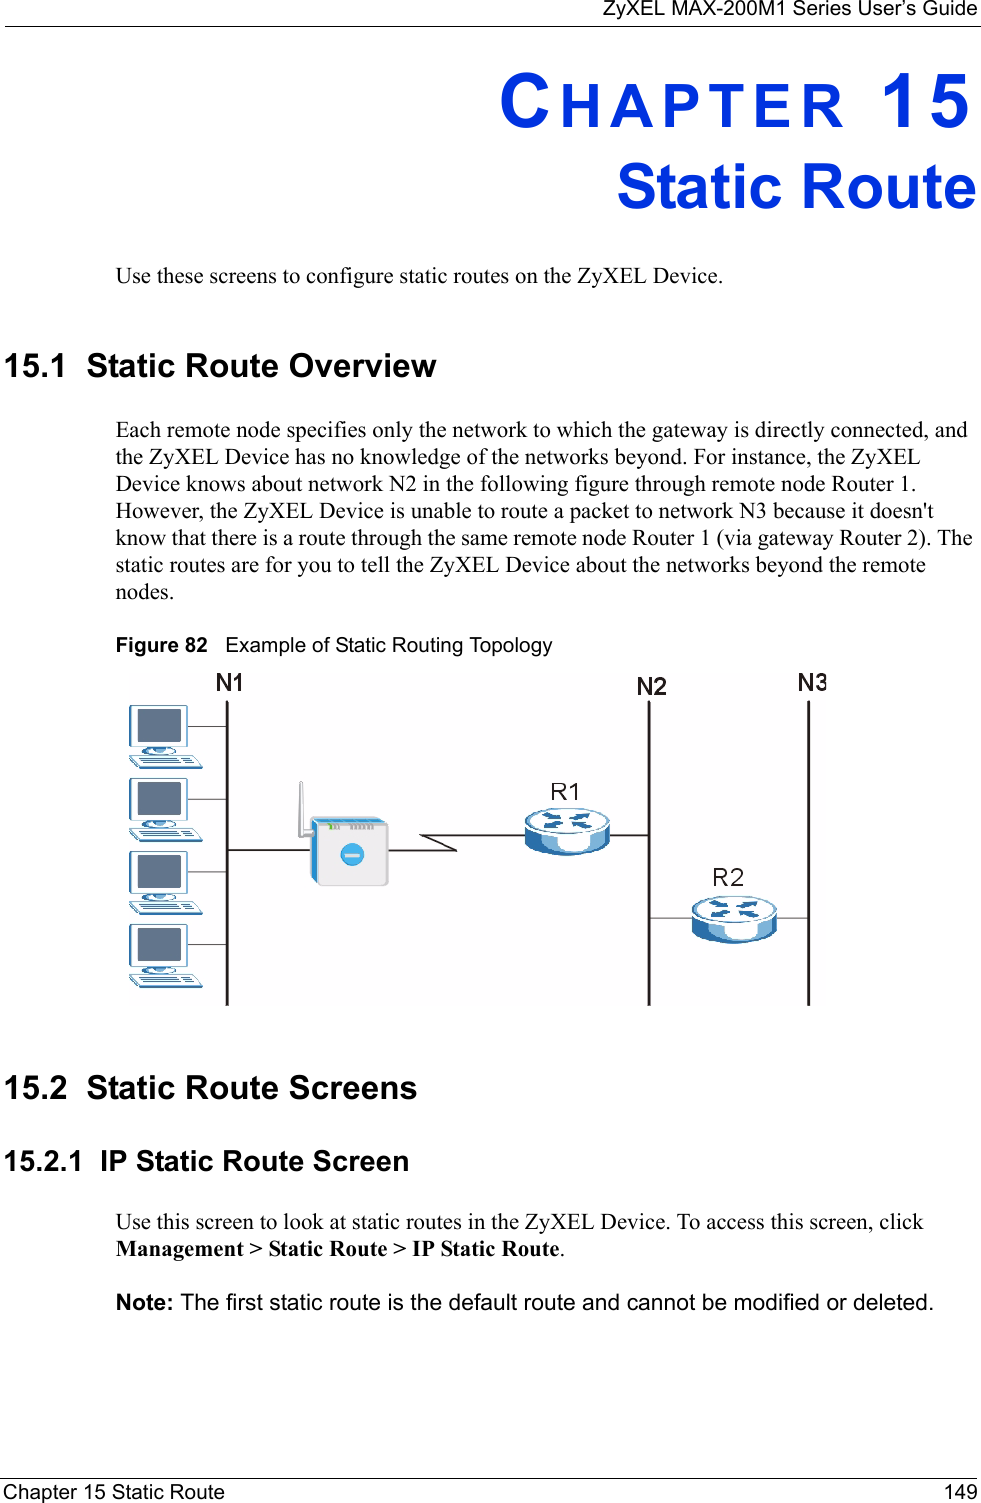 ZyXEL MAX-200M1 Series User’s GuideChapter 15 Static Route 149CHAPTER 15Static RouteUse these screens to configure static routes on the ZyXEL Device.15.1  Static Route OverviewEach remote node specifies only the network to which the gateway is directly connected, and the ZyXEL Device has no knowledge of the networks beyond. For instance, the ZyXEL Device knows about network N2 in the following figure through remote node Router 1. However, the ZyXEL Device is unable to route a packet to network N3 because it doesn&apos;t know that there is a route through the same remote node Router 1 (via gateway Router 2). The static routes are for you to tell the ZyXEL Device about the networks beyond the remote nodes.Figure 82   Example of Static Routing Topology15.2  Static Route Screens15.2.1  IP Static Route ScreenUse this screen to look at static routes in the ZyXEL Device. To access this screen, click Management &gt; Static Route &gt; IP Static Route.Note: The first static route is the default route and cannot be modified or deleted.